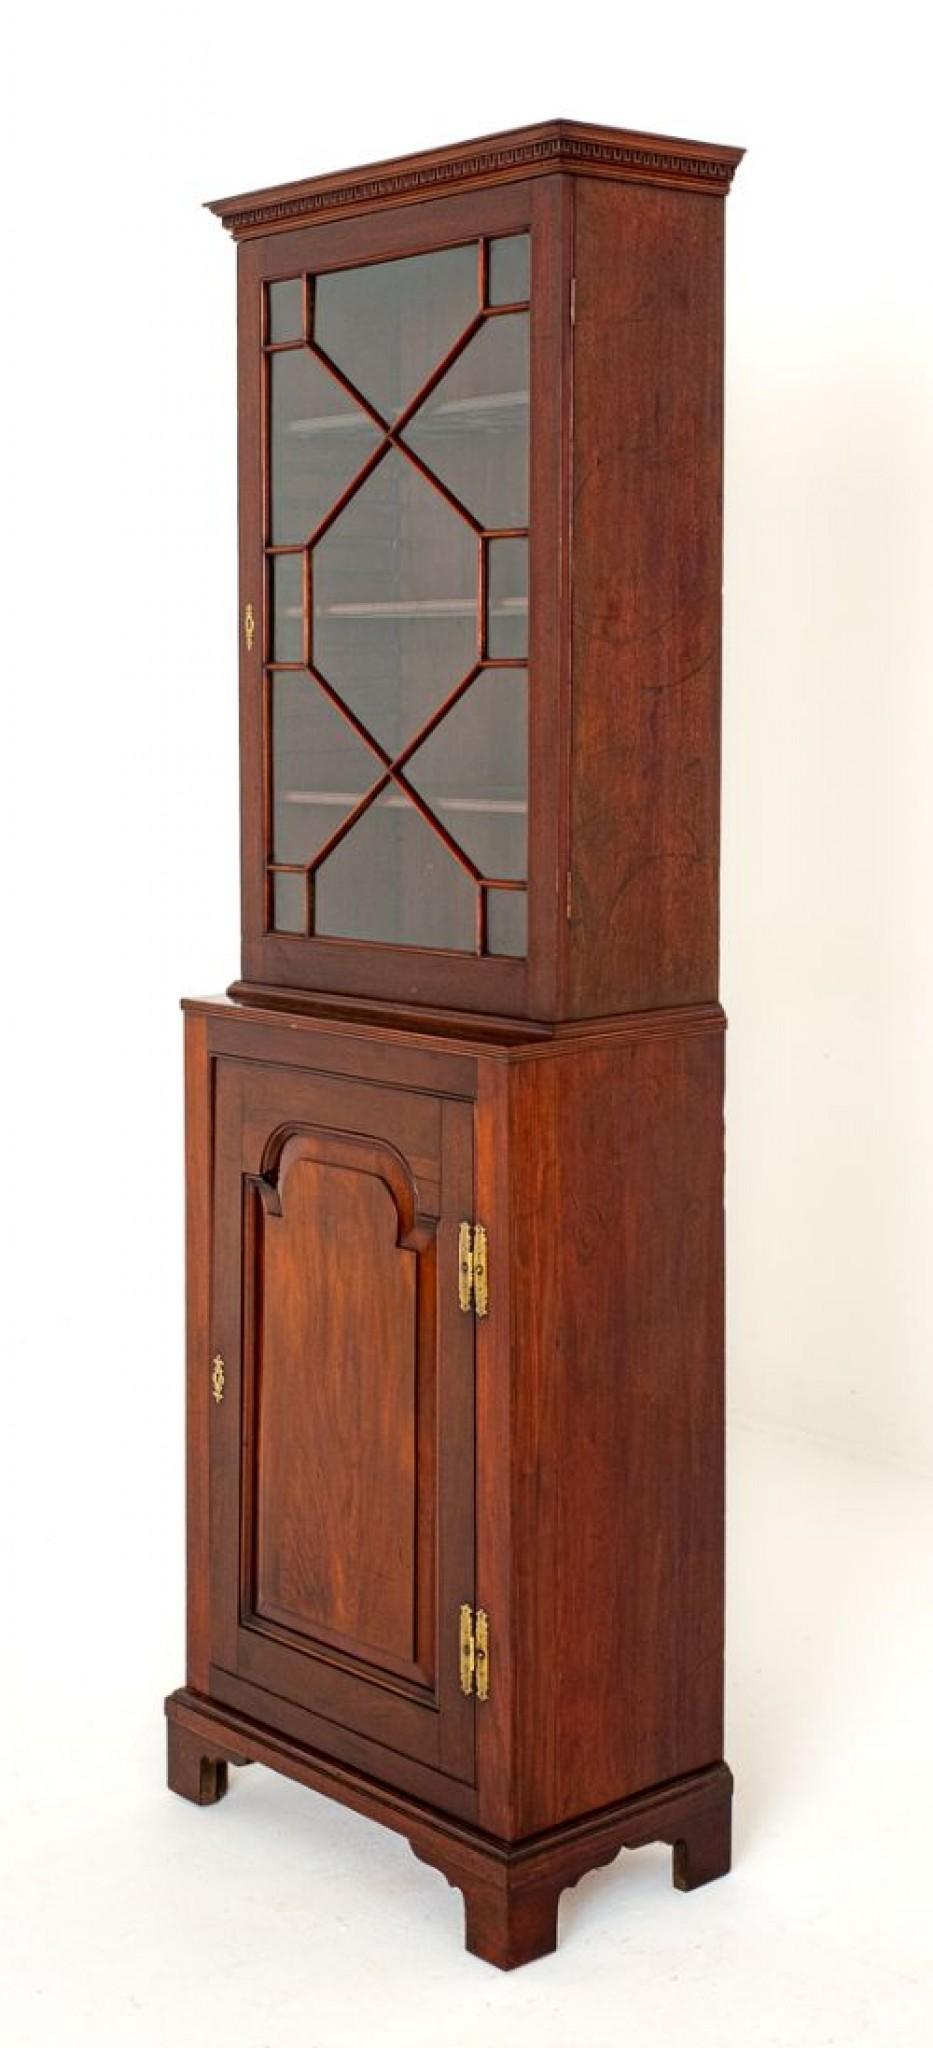 Georgian Mahogany Glazed Bookcase.
This Bookcase Stands upon Bracket Feet.
Period Georgian
Havin g a Single Paneled Door to the Base.
The Upper Section Features a Astragal Glazed Door Which Opens to Reveal Shelving.
Presented in Good